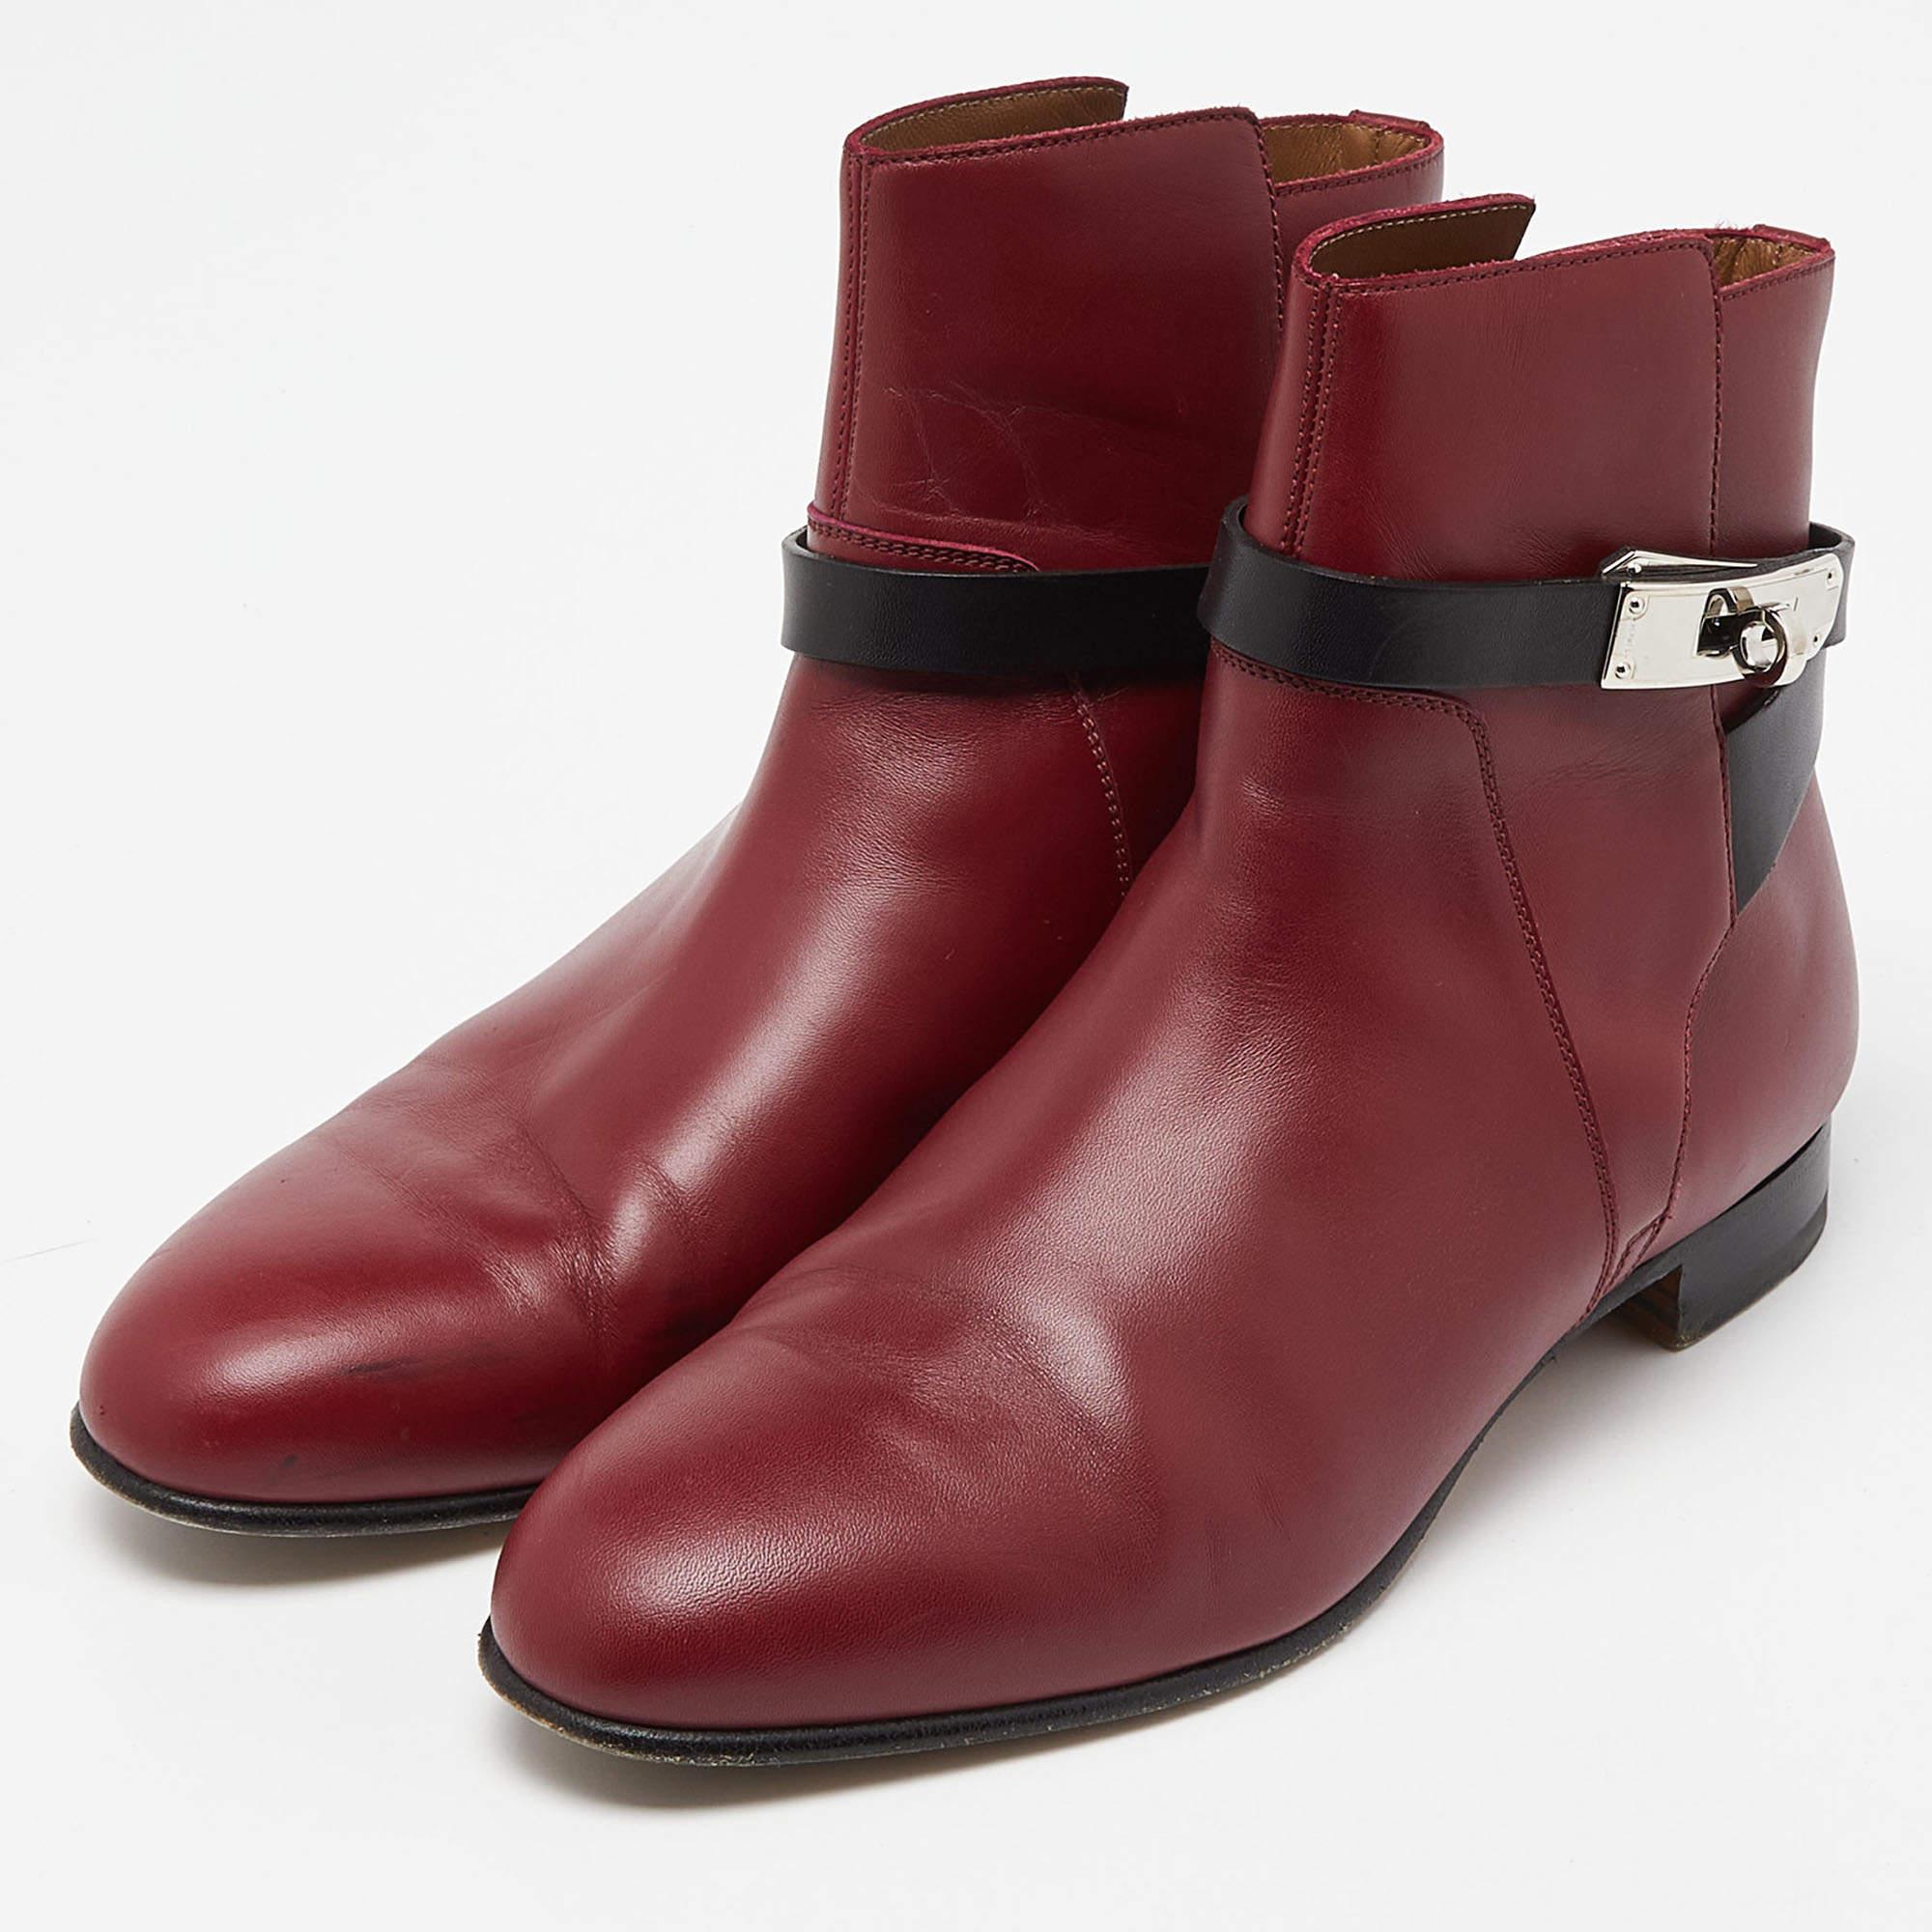 Hermes Burgundy/Black Leather Neo Ankle Boots Size 39 4